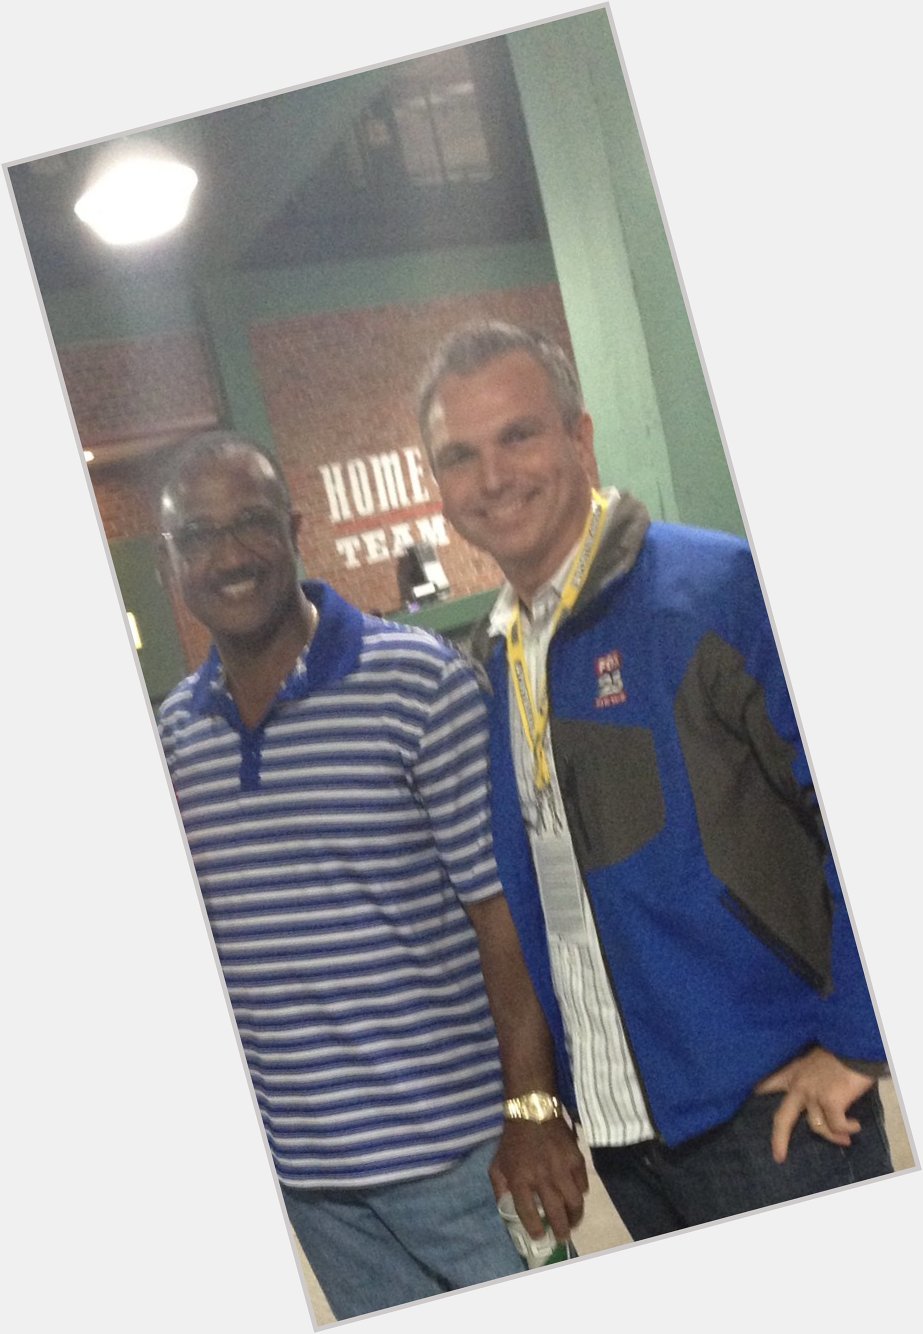 Met one of my idols in 2013. Happy Birthday to a legend- Jim Rice 